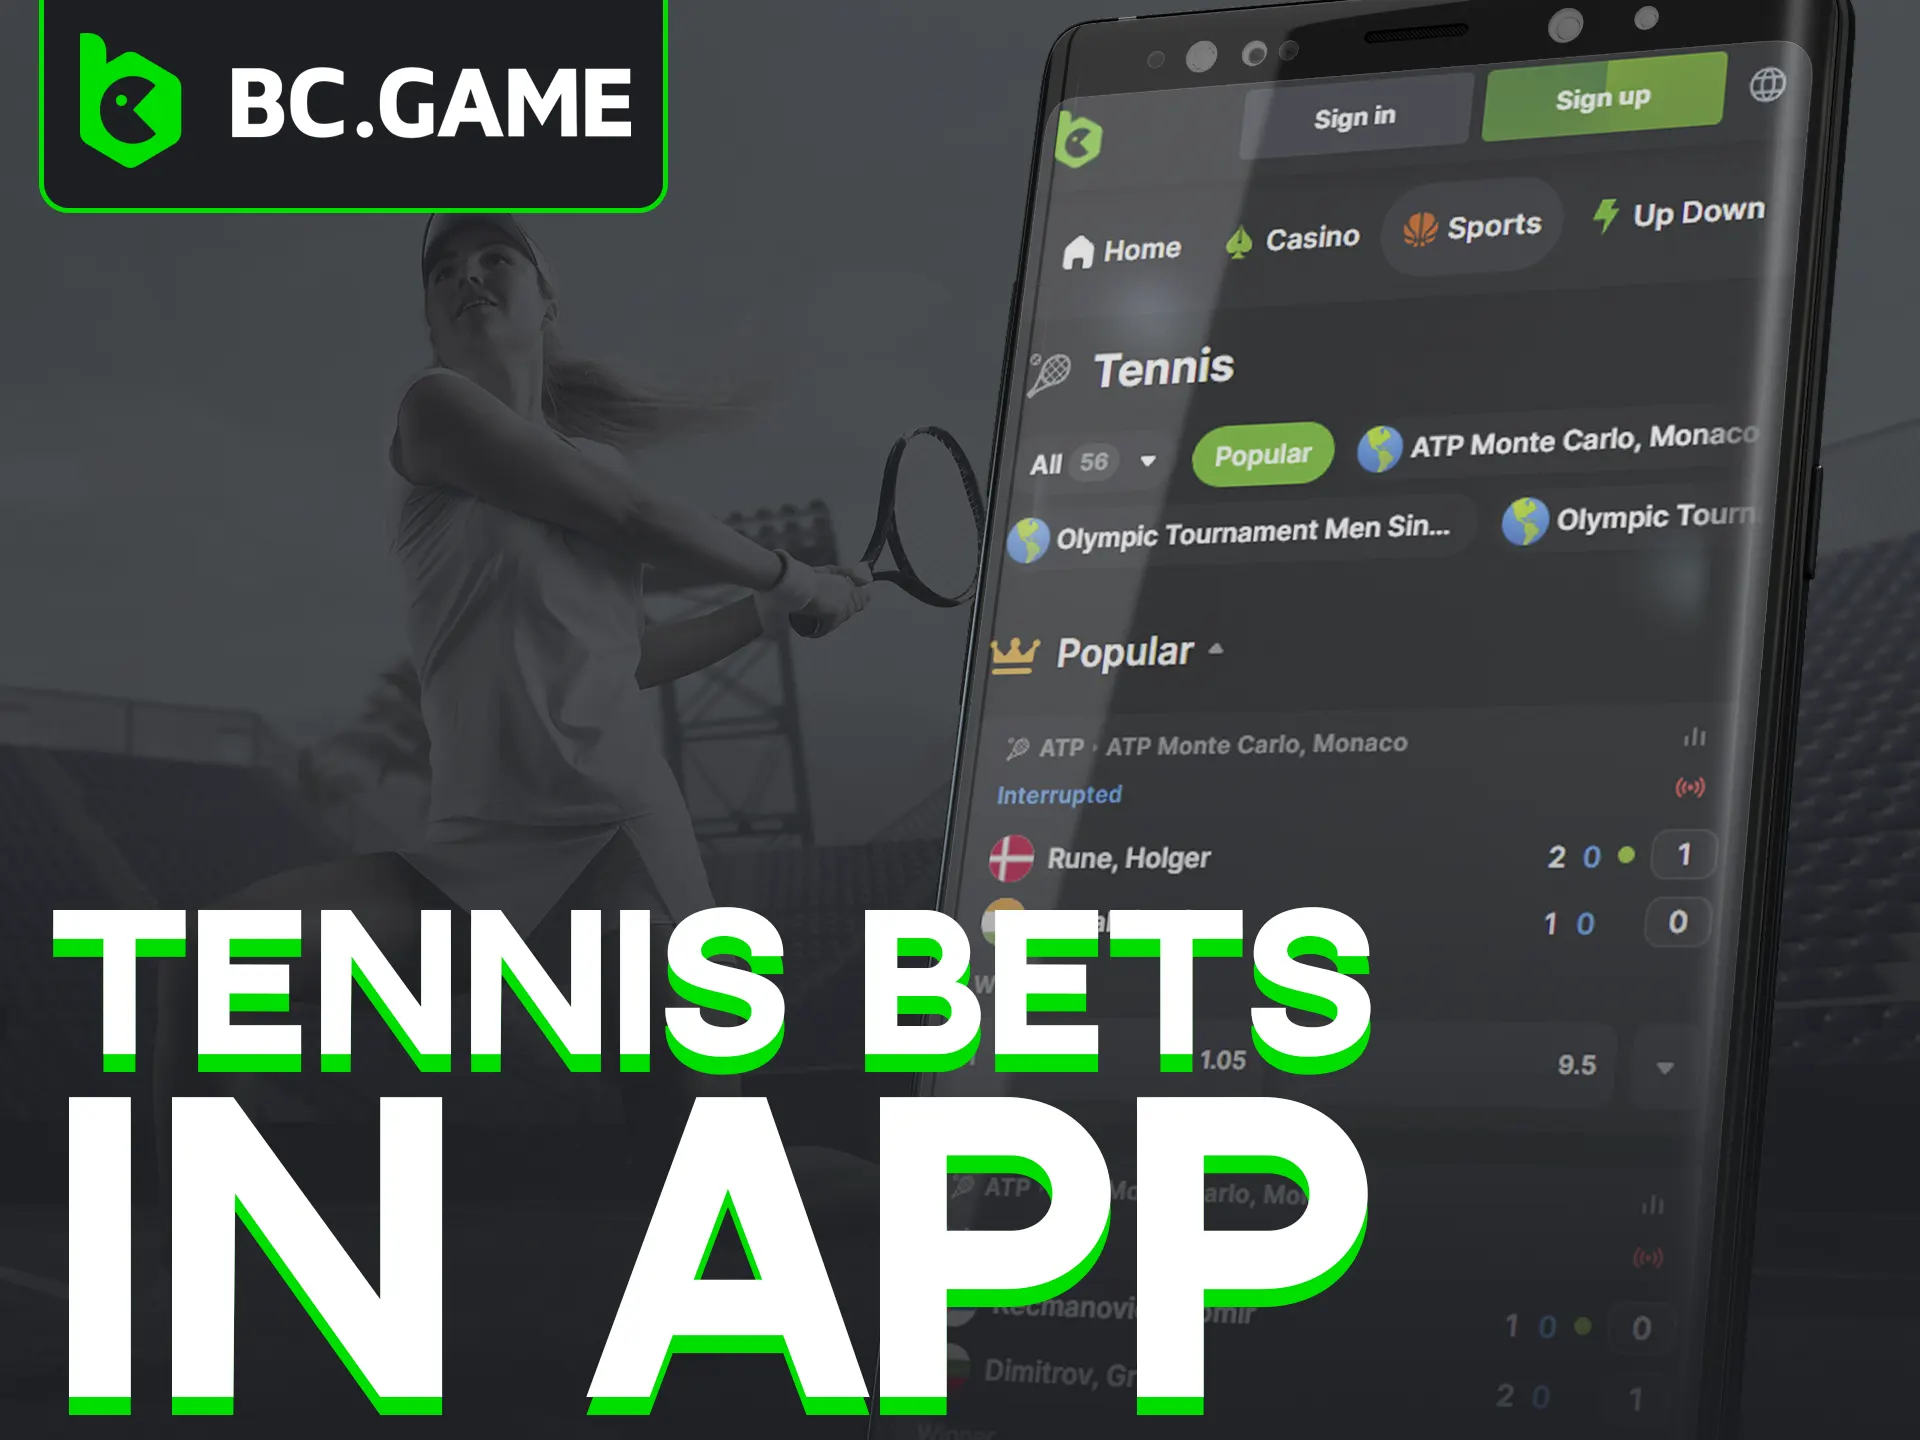 Bet on tennis easily with BC Game's mobile site app.